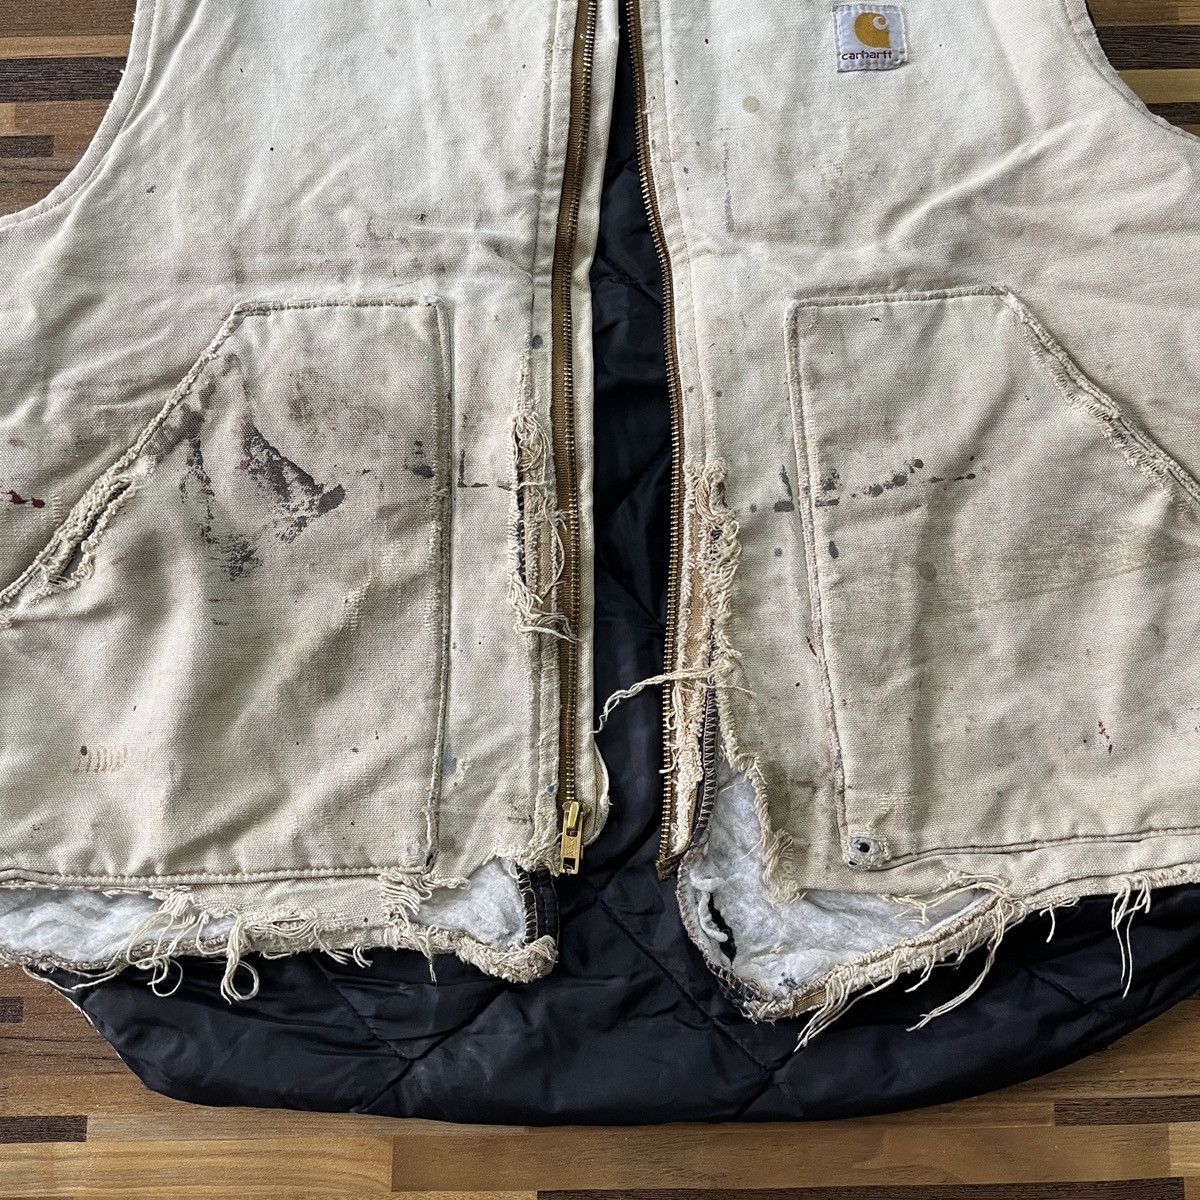 Distressed Vintage Carhartt Worker Vest Ripped Made In USA - 9